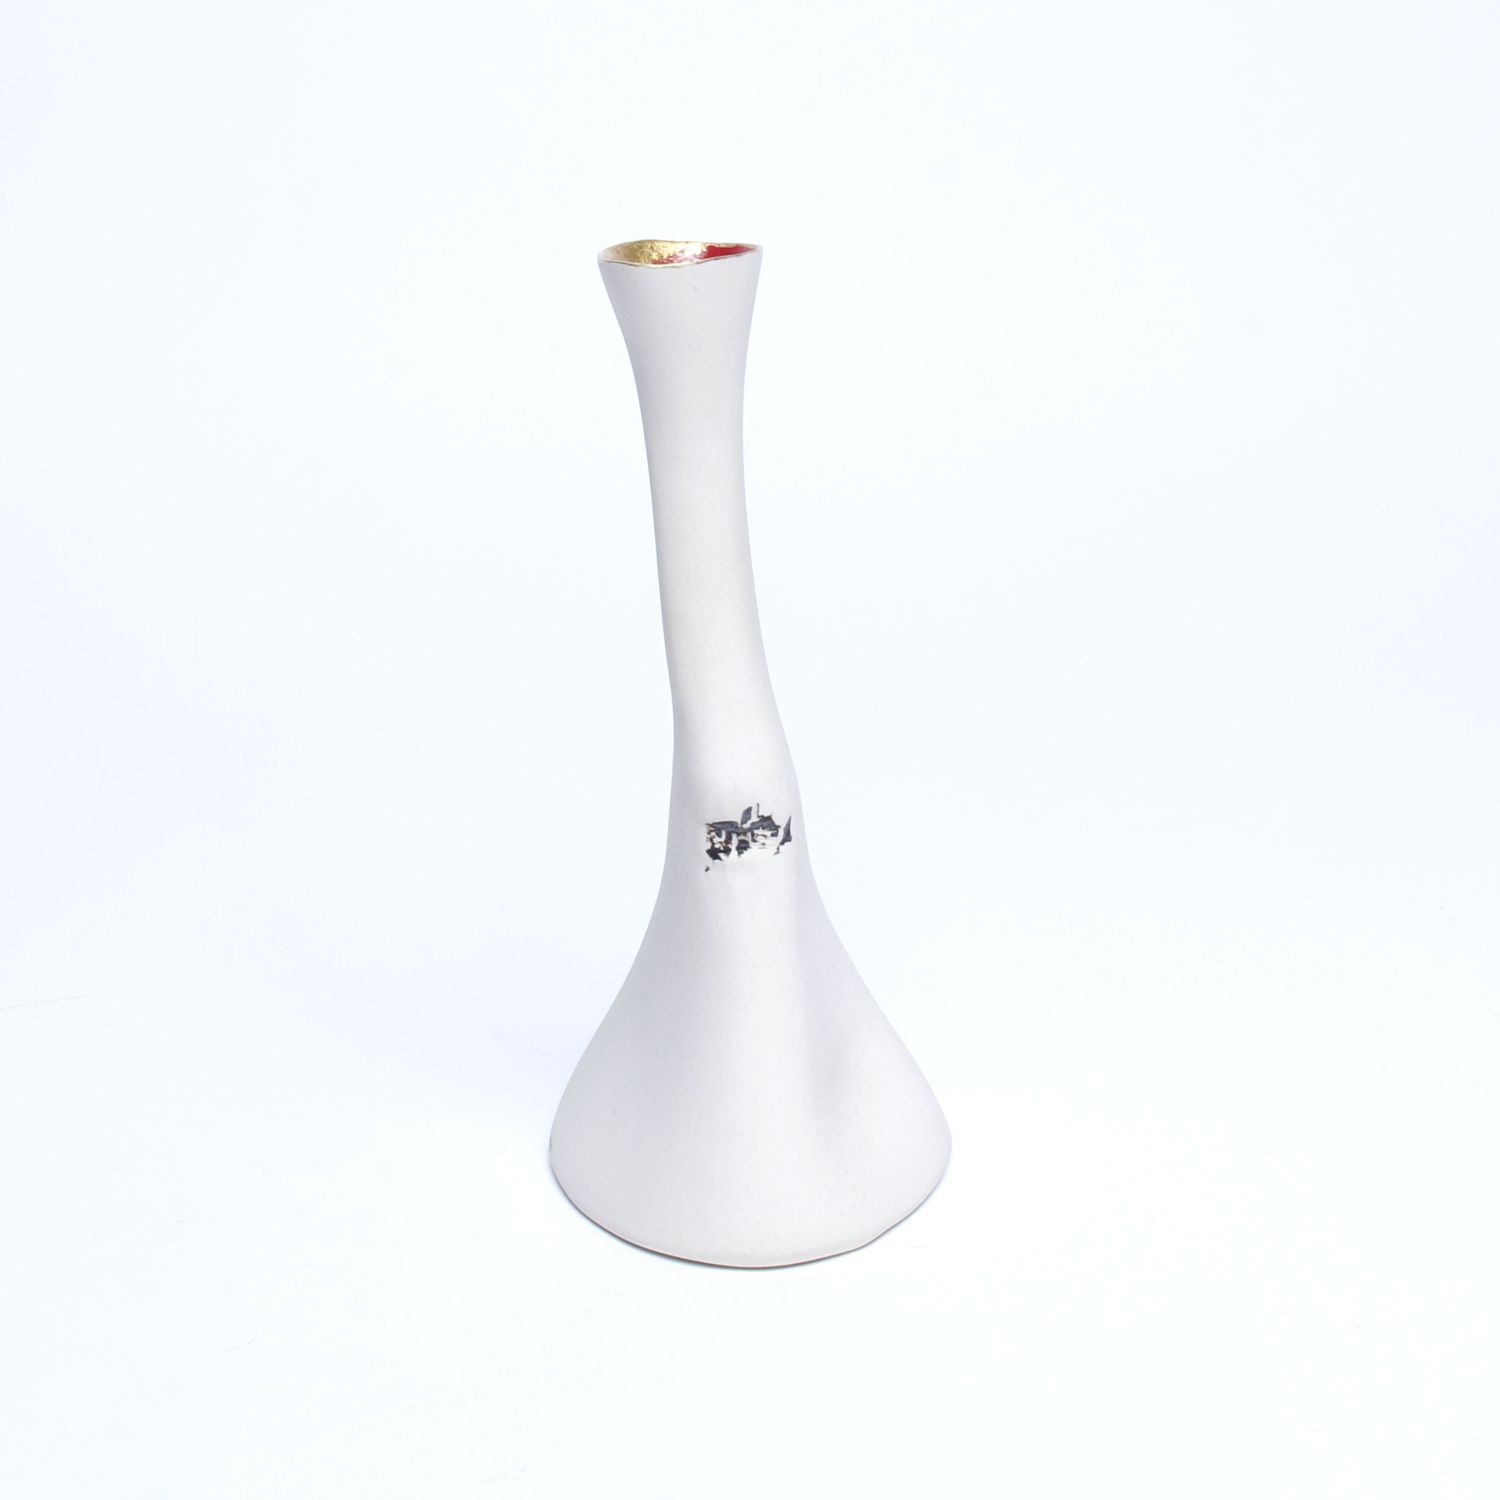 Jane Wilson: Vase (Each sold separately) Product Image 8 of 9